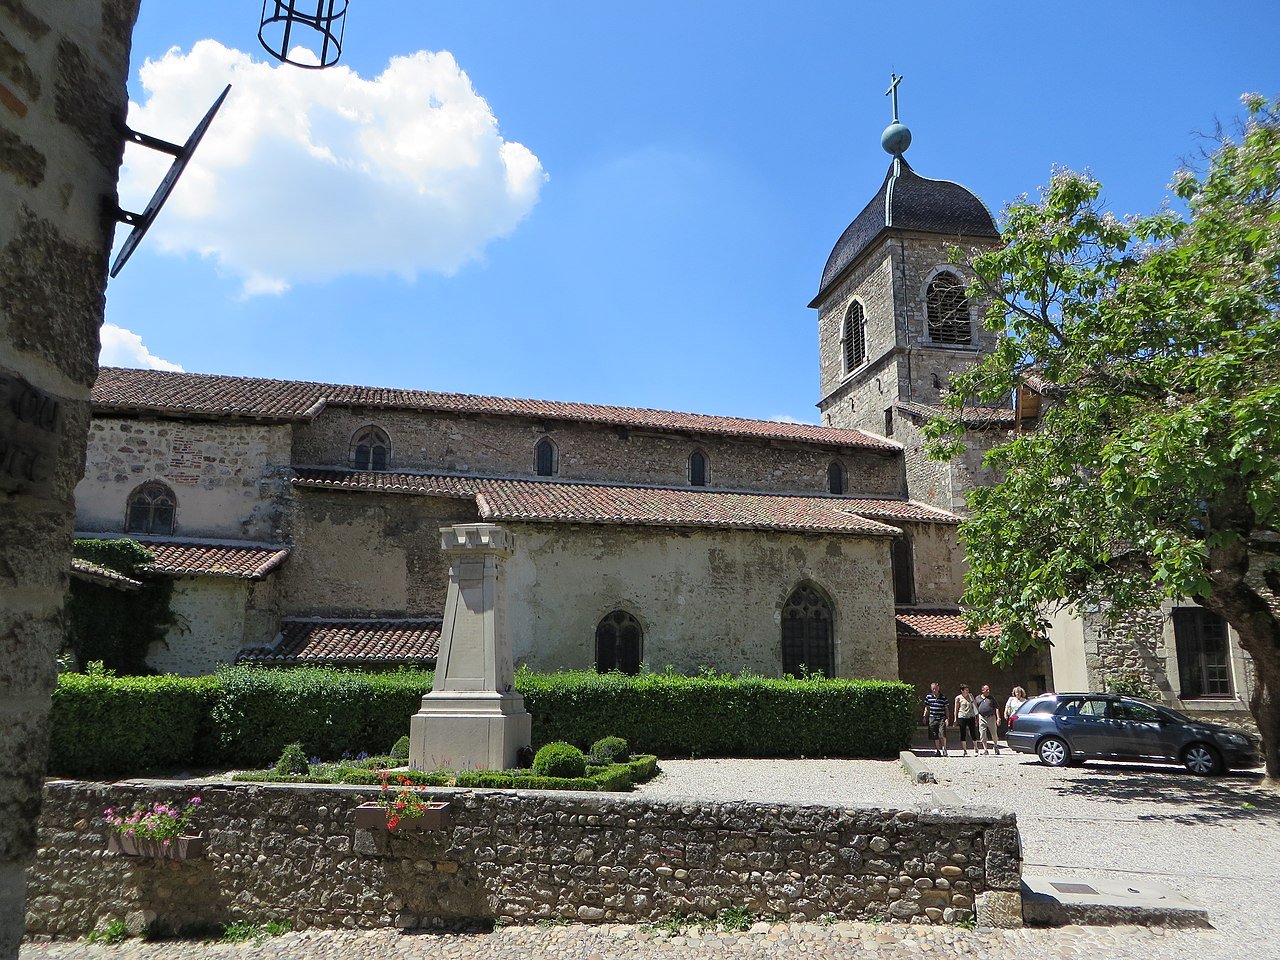 Church of Saint Mary Magdalene, Perouges, France